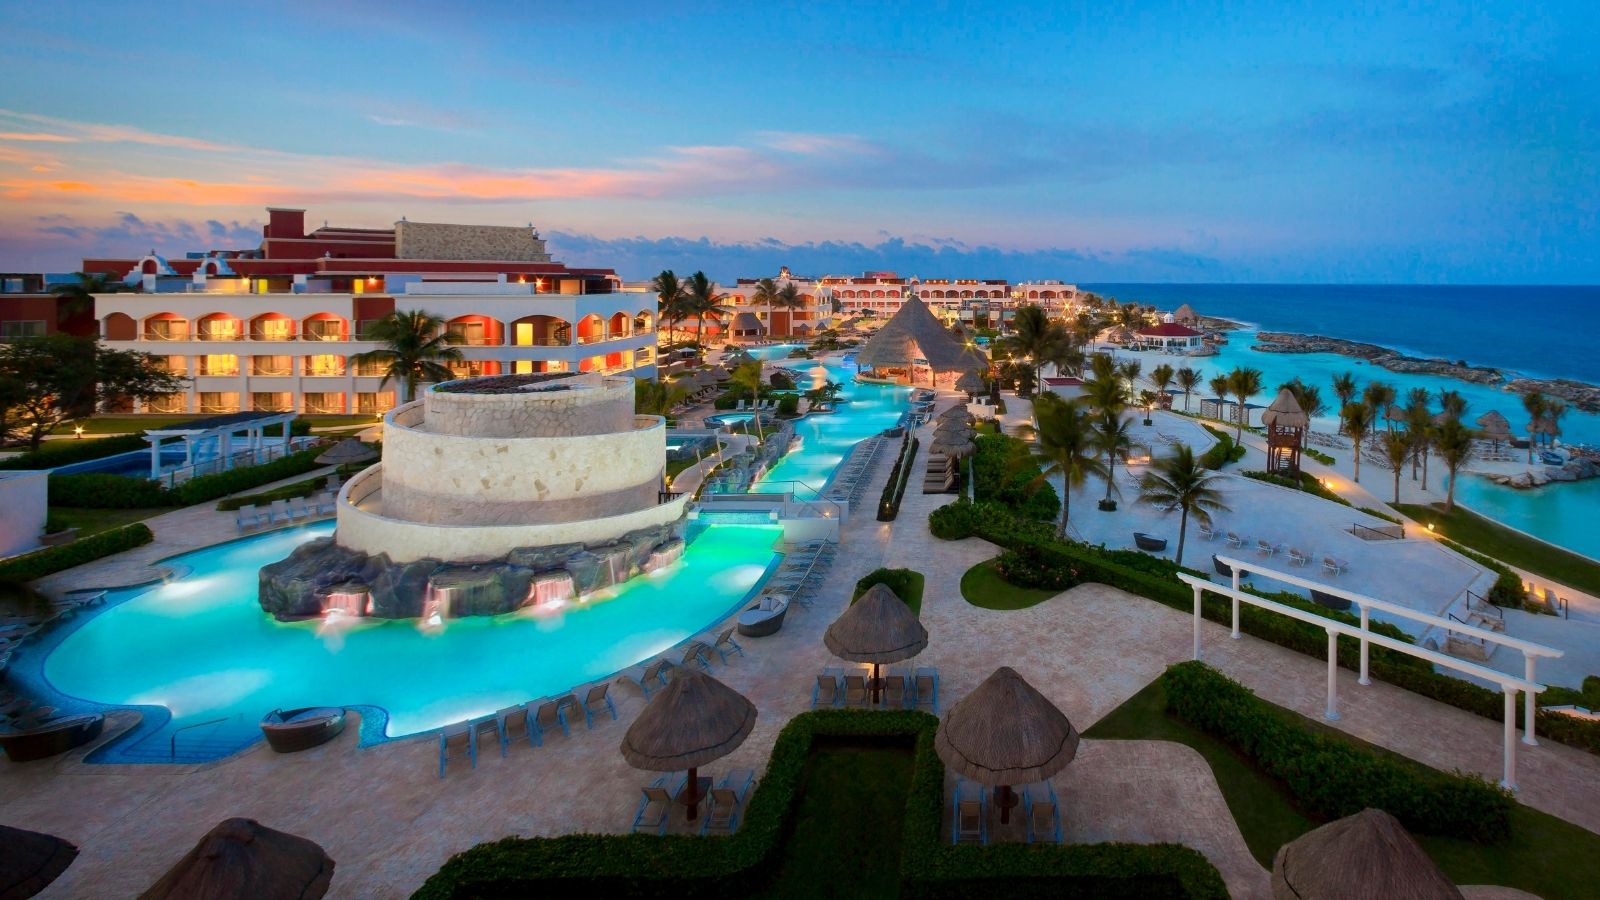 The Ultimate Mexican Getaway: All-Inclusive Resorts and Beyond